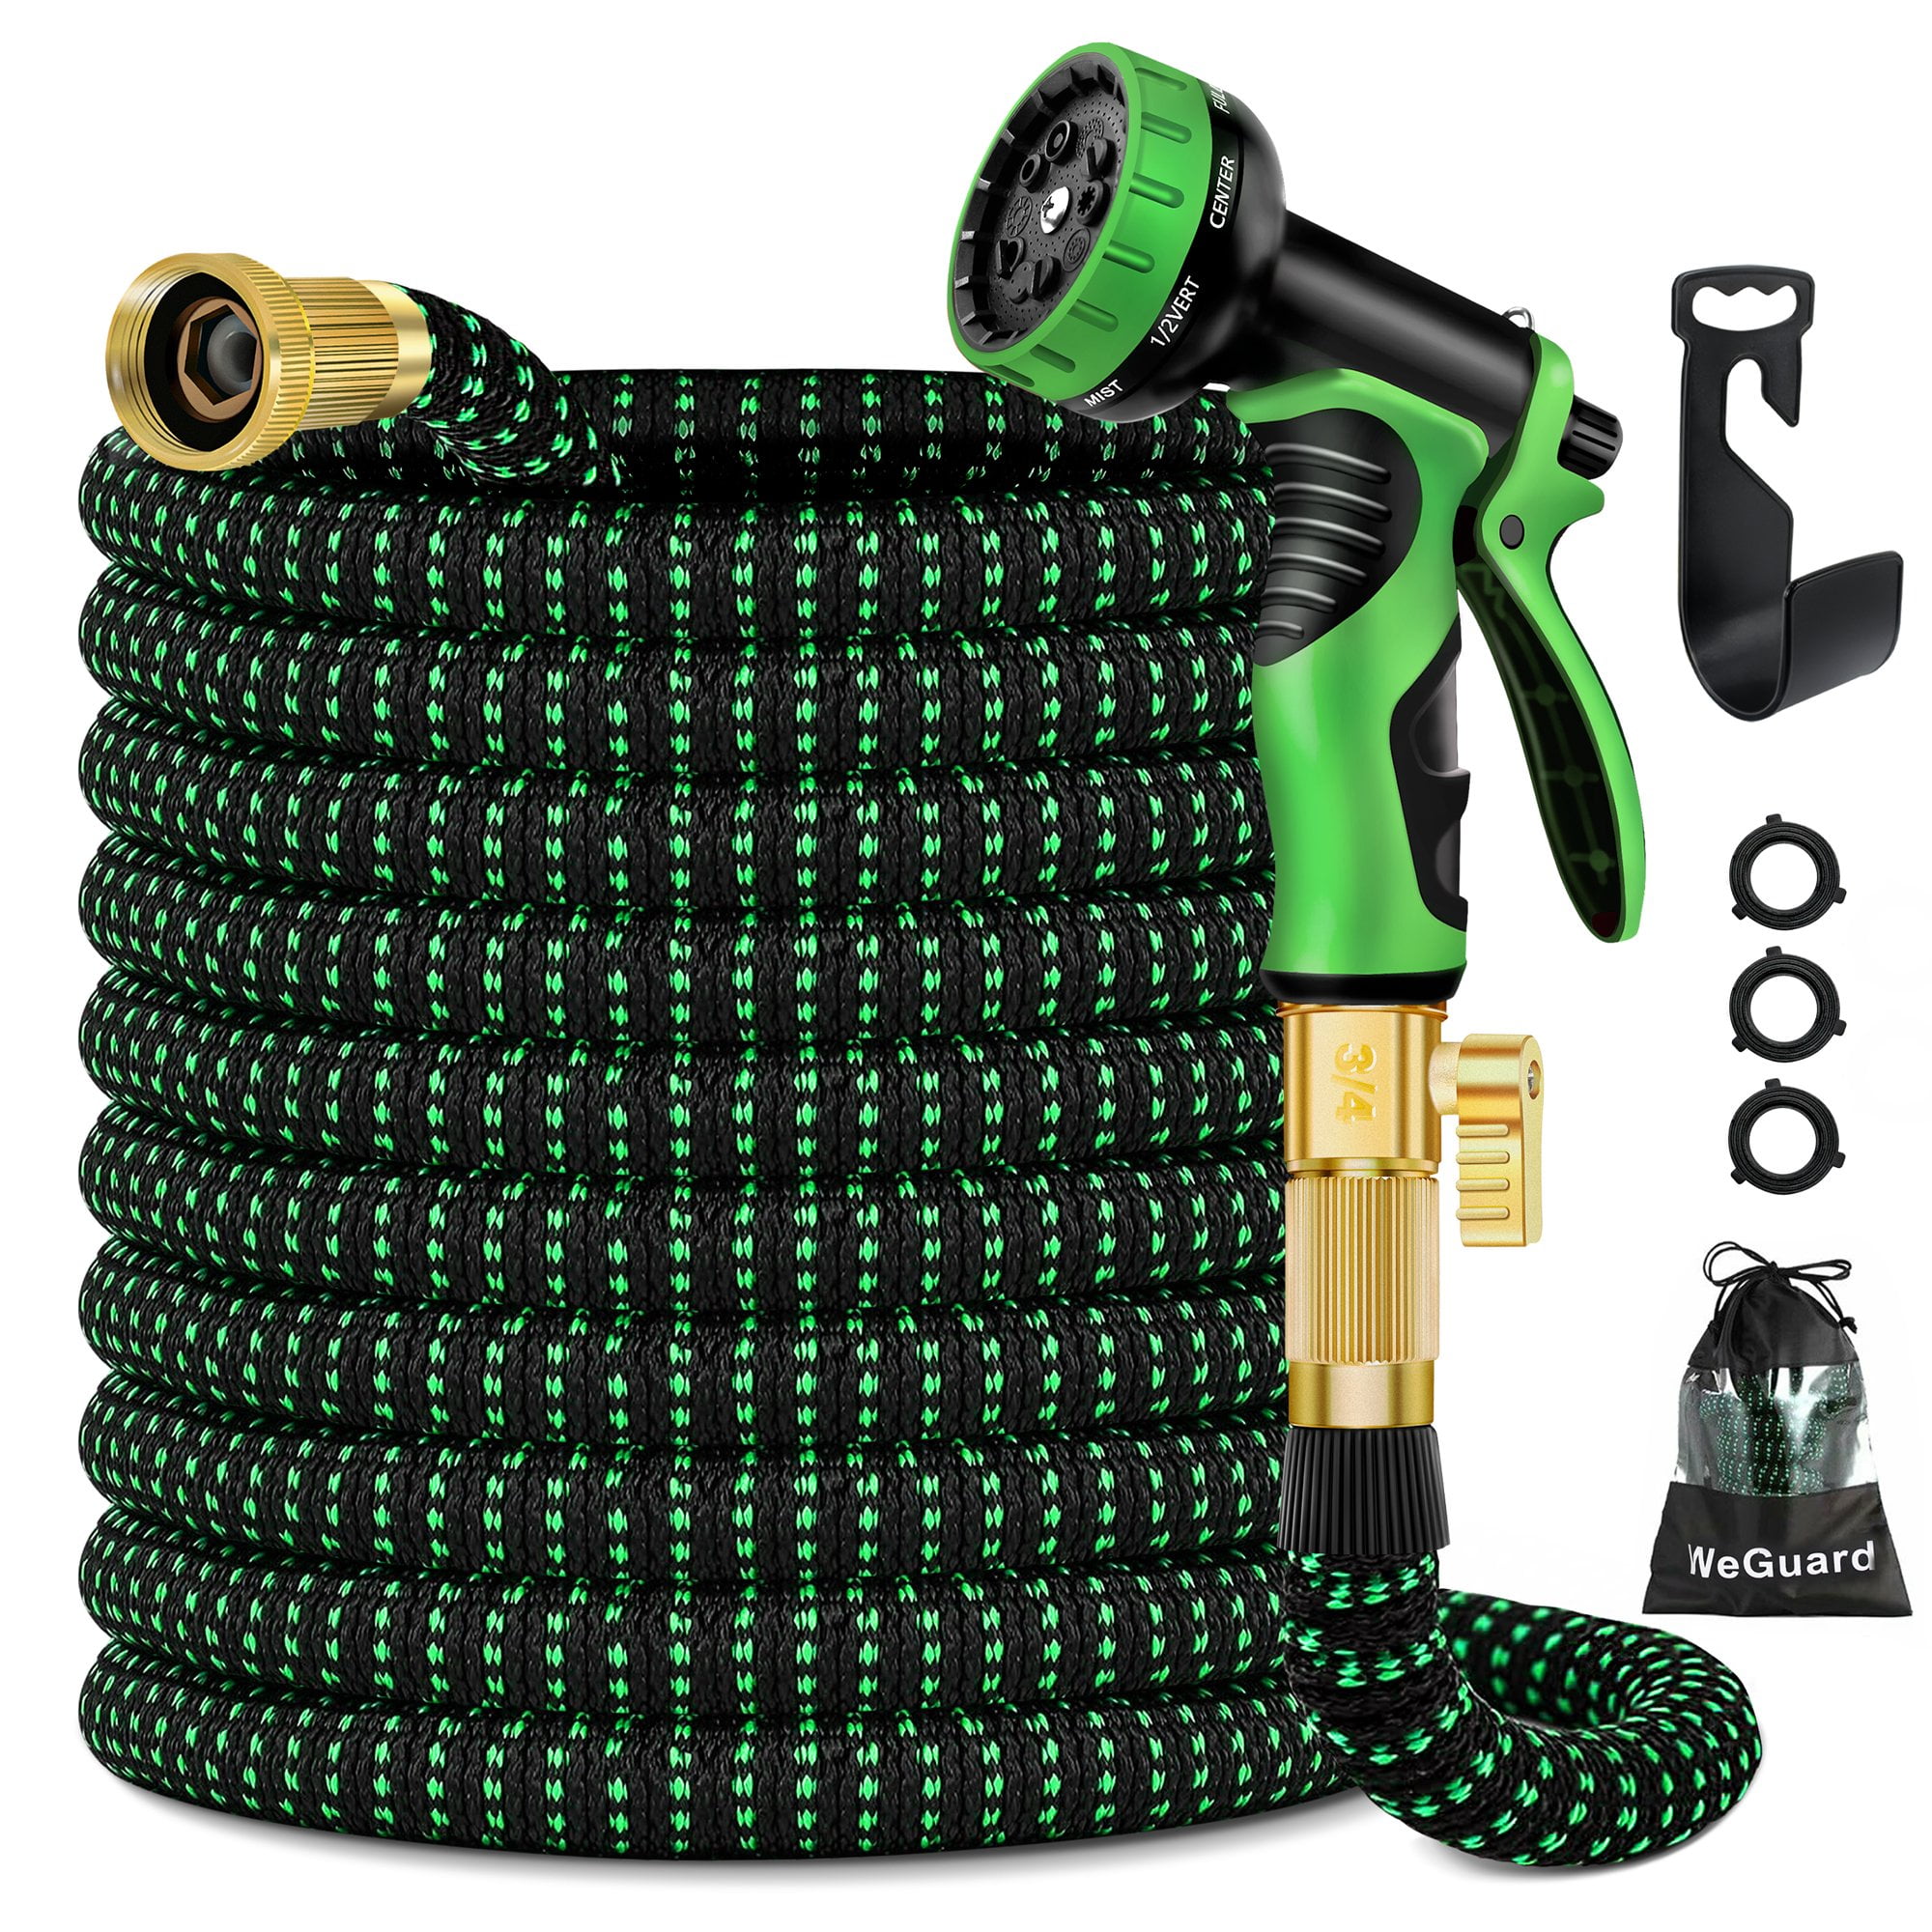 3/4 inch Solid Brass Fittings and Double Latex Core Lightweight & No-Kink Flexible Garden Hose Flexi Hose with 8 Function Nozzle Expandable Garden Hose 100 ft Green